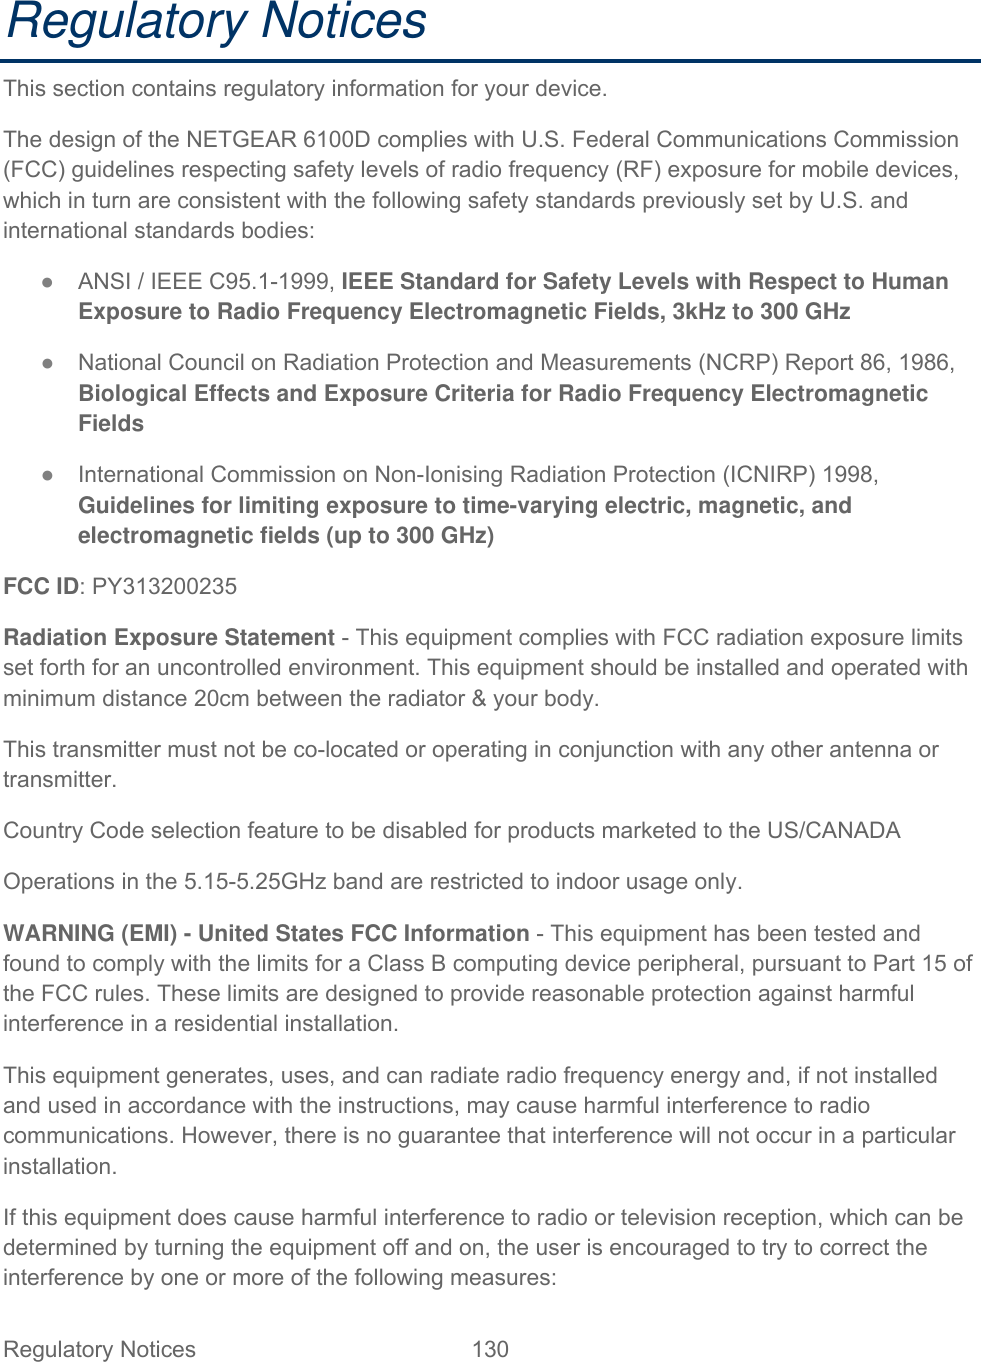 Regulatory Notices  130   Regulatory Notices This section contains regulatory information for your device. The design of the NETGEAR 6100D complies with U.S. Federal Communications Commission (FCC) guidelines respecting safety levels of radio frequency (RF) exposure for mobile devices, which in turn are consistent with the following safety standards previously set by U.S. and international standards bodies: ● ANSI / IEEE C95.1-1999, IEEE Standard for Safety Levels with Respect to Human Exposure to Radio Frequency Electromagnetic Fields, 3kHz to 300 GHz ● National Council on Radiation Protection and Measurements (NCRP) Report 86, 1986, Biological Effects and Exposure Criteria for Radio Frequency Electromagnetic Fields ● International Commission on Non-Ionising Radiation Protection (ICNIRP) 1998, Guidelines for limiting exposure to time-varying electric, magnetic, and electromagnetic fields (up to 300 GHz) FCC ID: PY313200235 Radiation Exposure Statement - This equipment complies with FCC radiation exposure limits set forth for an uncontrolled environment. This equipment should be installed and operated with minimum distance 20cm between the radiator &amp; your body. This transmitter must not be co-located or operating in conjunction with any other antenna or transmitter. Country Code selection feature to be disabled for products marketed to the US/CANADA Operations in the 5.15-5.25GHz band are restricted to indoor usage only. WARNING (EMI) - United States FCC Information - This equipment has been tested and found to comply with the limits for a Class B computing device peripheral, pursuant to Part 15 of the FCC rules. These limits are designed to provide reasonable protection against harmful interference in a residential installation. This equipment generates, uses, and can radiate radio frequency energy and, if not installed and used in accordance with the instructions, may cause harmful interference to radio communications. However, there is no guarantee that interference will not occur in a particular installation. If this equipment does cause harmful interference to radio or television reception, which can be determined by turning the equipment off and on, the user is encouraged to try to correct the interference by one or more of the following measures: 